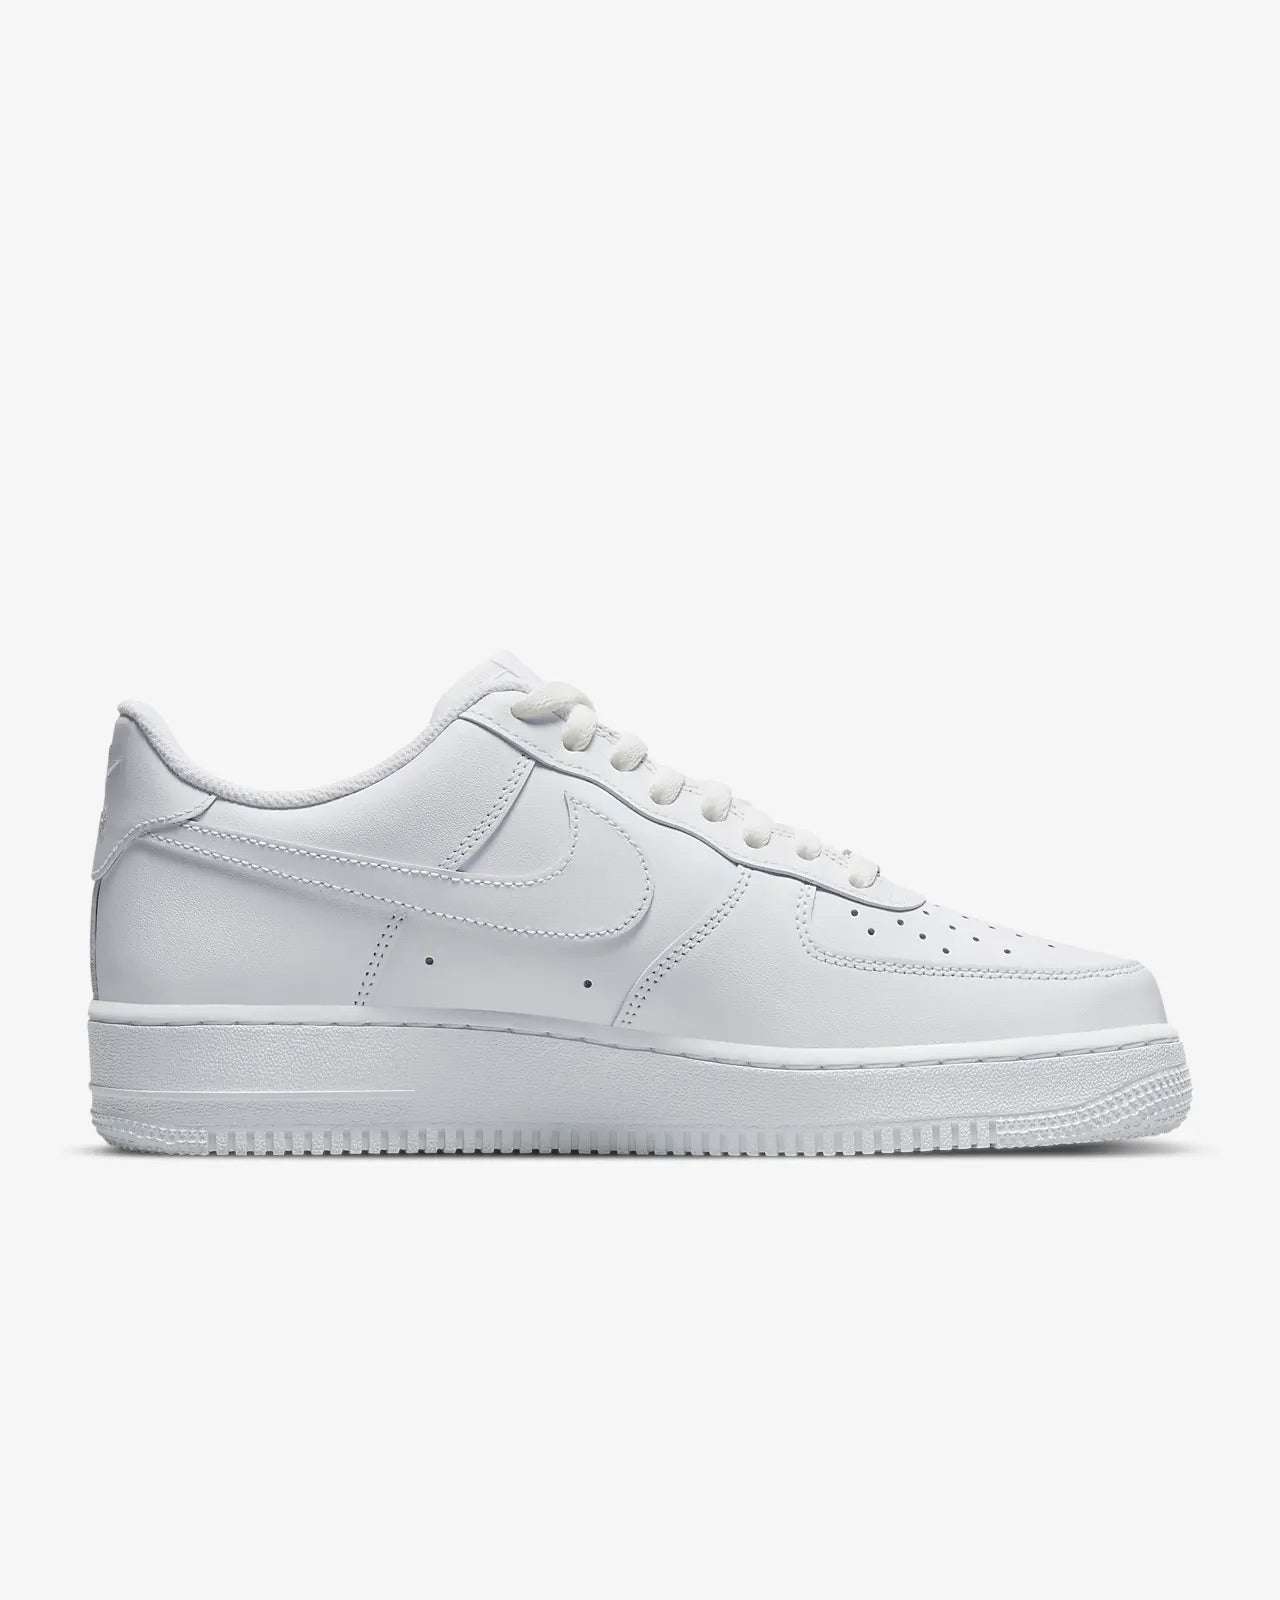 Nike Air Force 1 '07 Low Men's Trainers